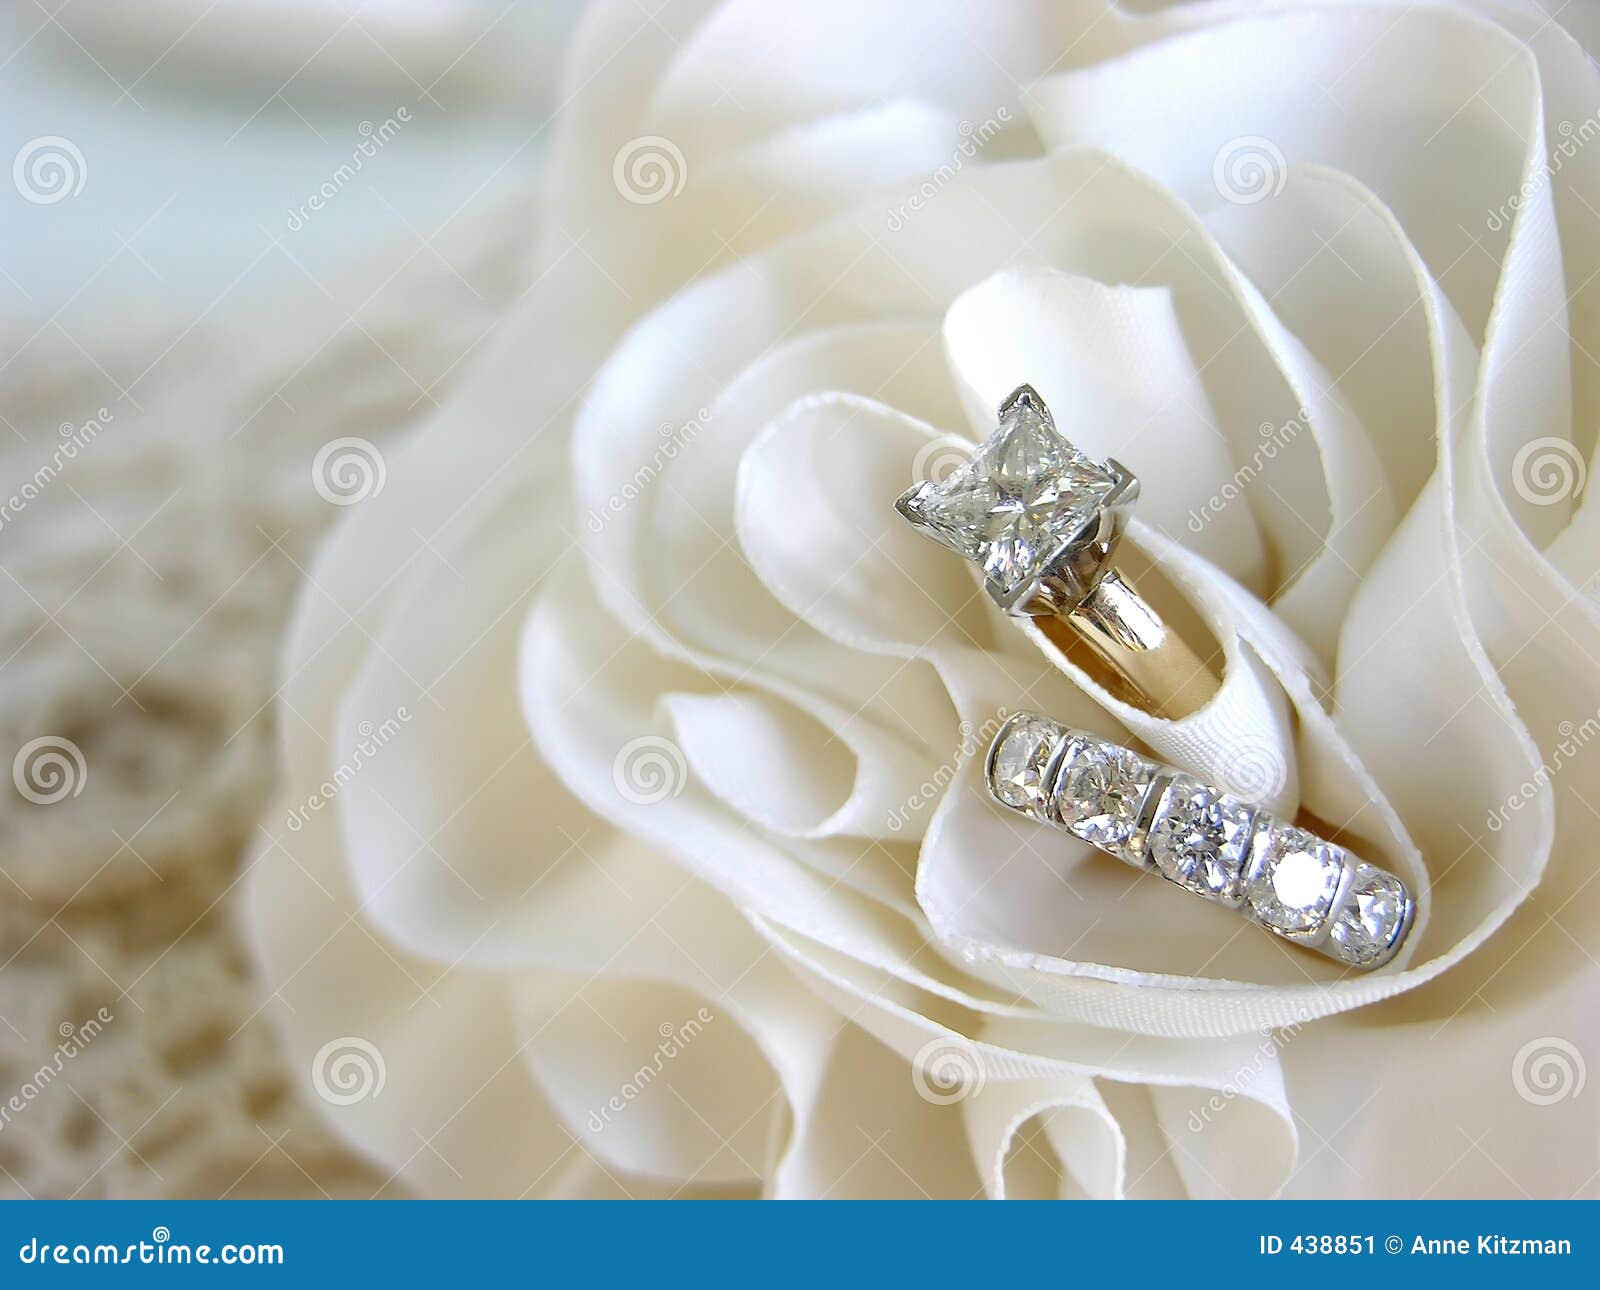 Diamond wedding rings in the folds of the bride's dress.